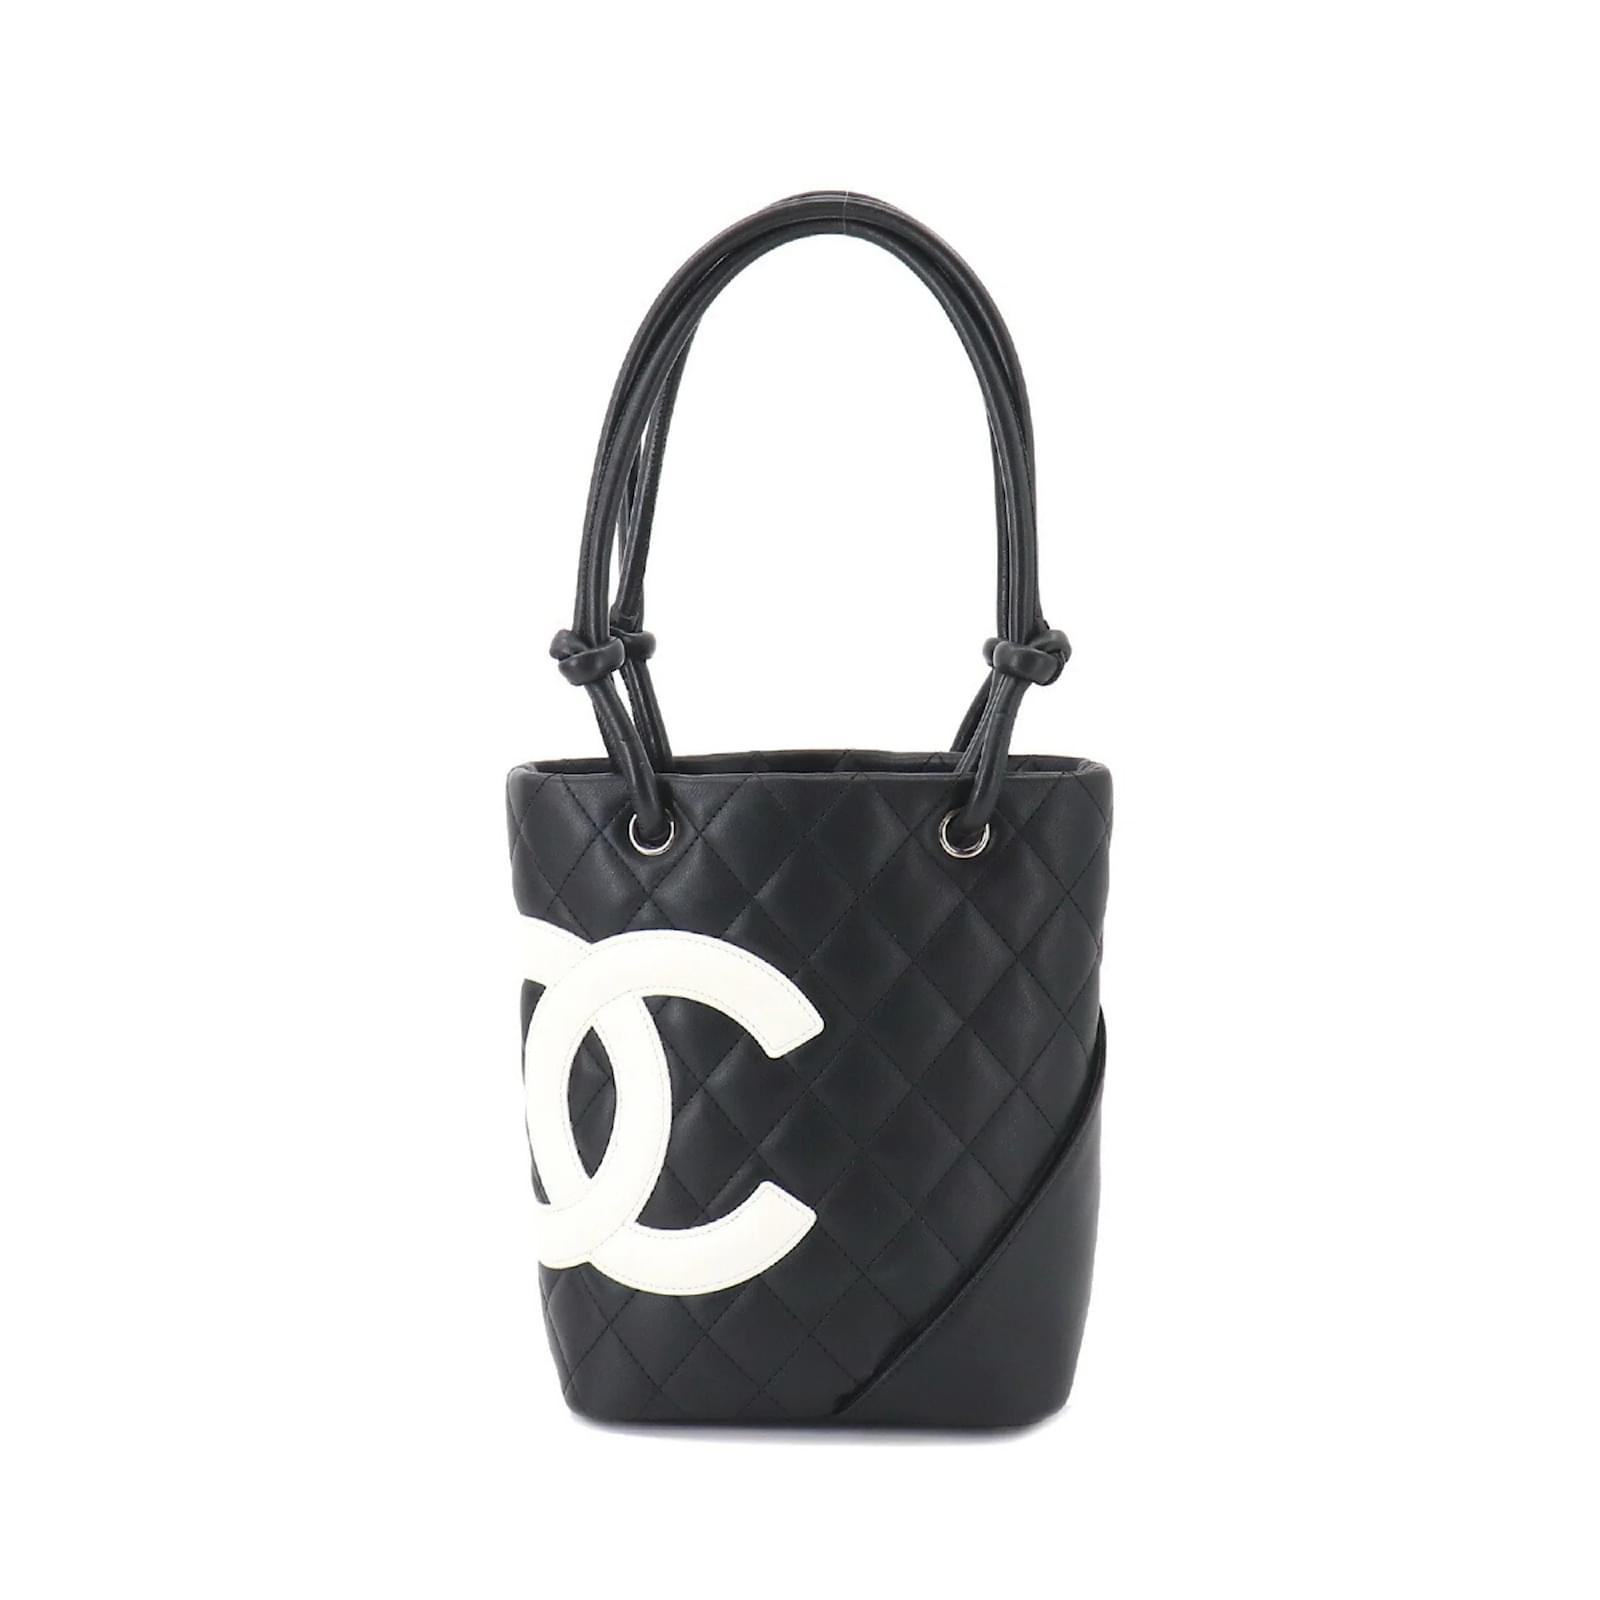 Vintage Chanel Cambon Ligne Tote Bag In Pink And Black CC Logo Medium Size